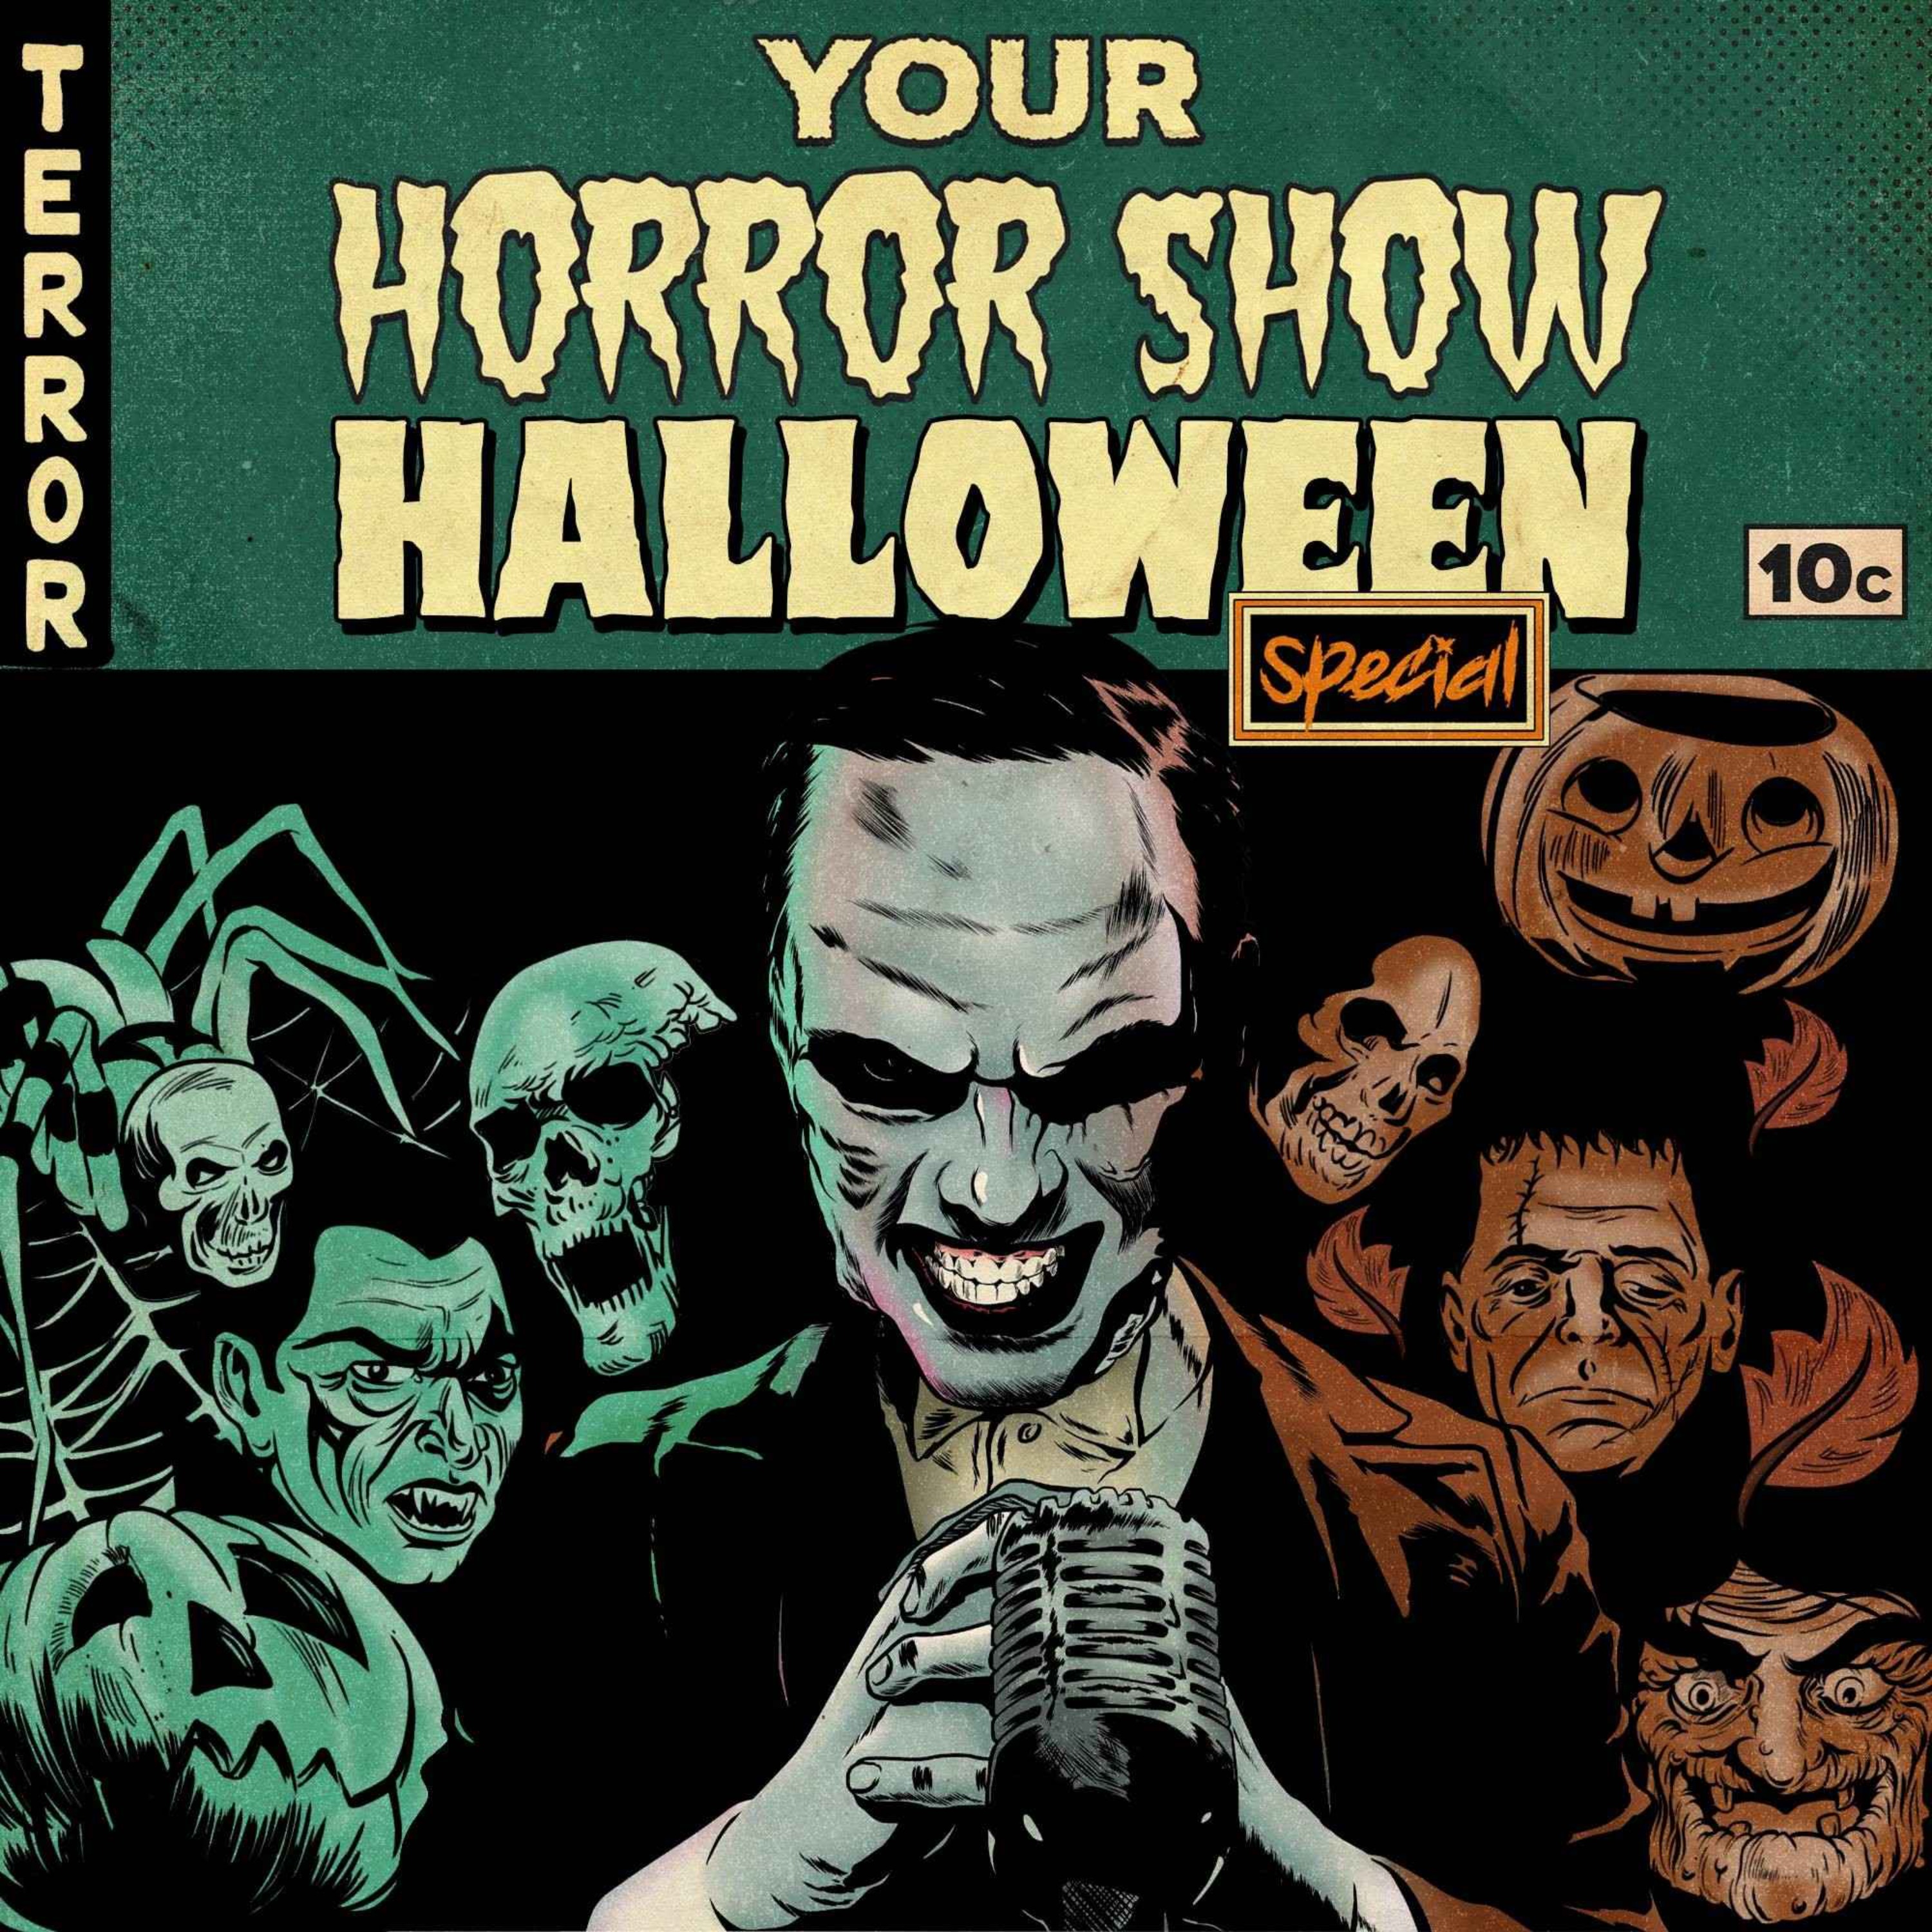 cover art for "Halloween Special"